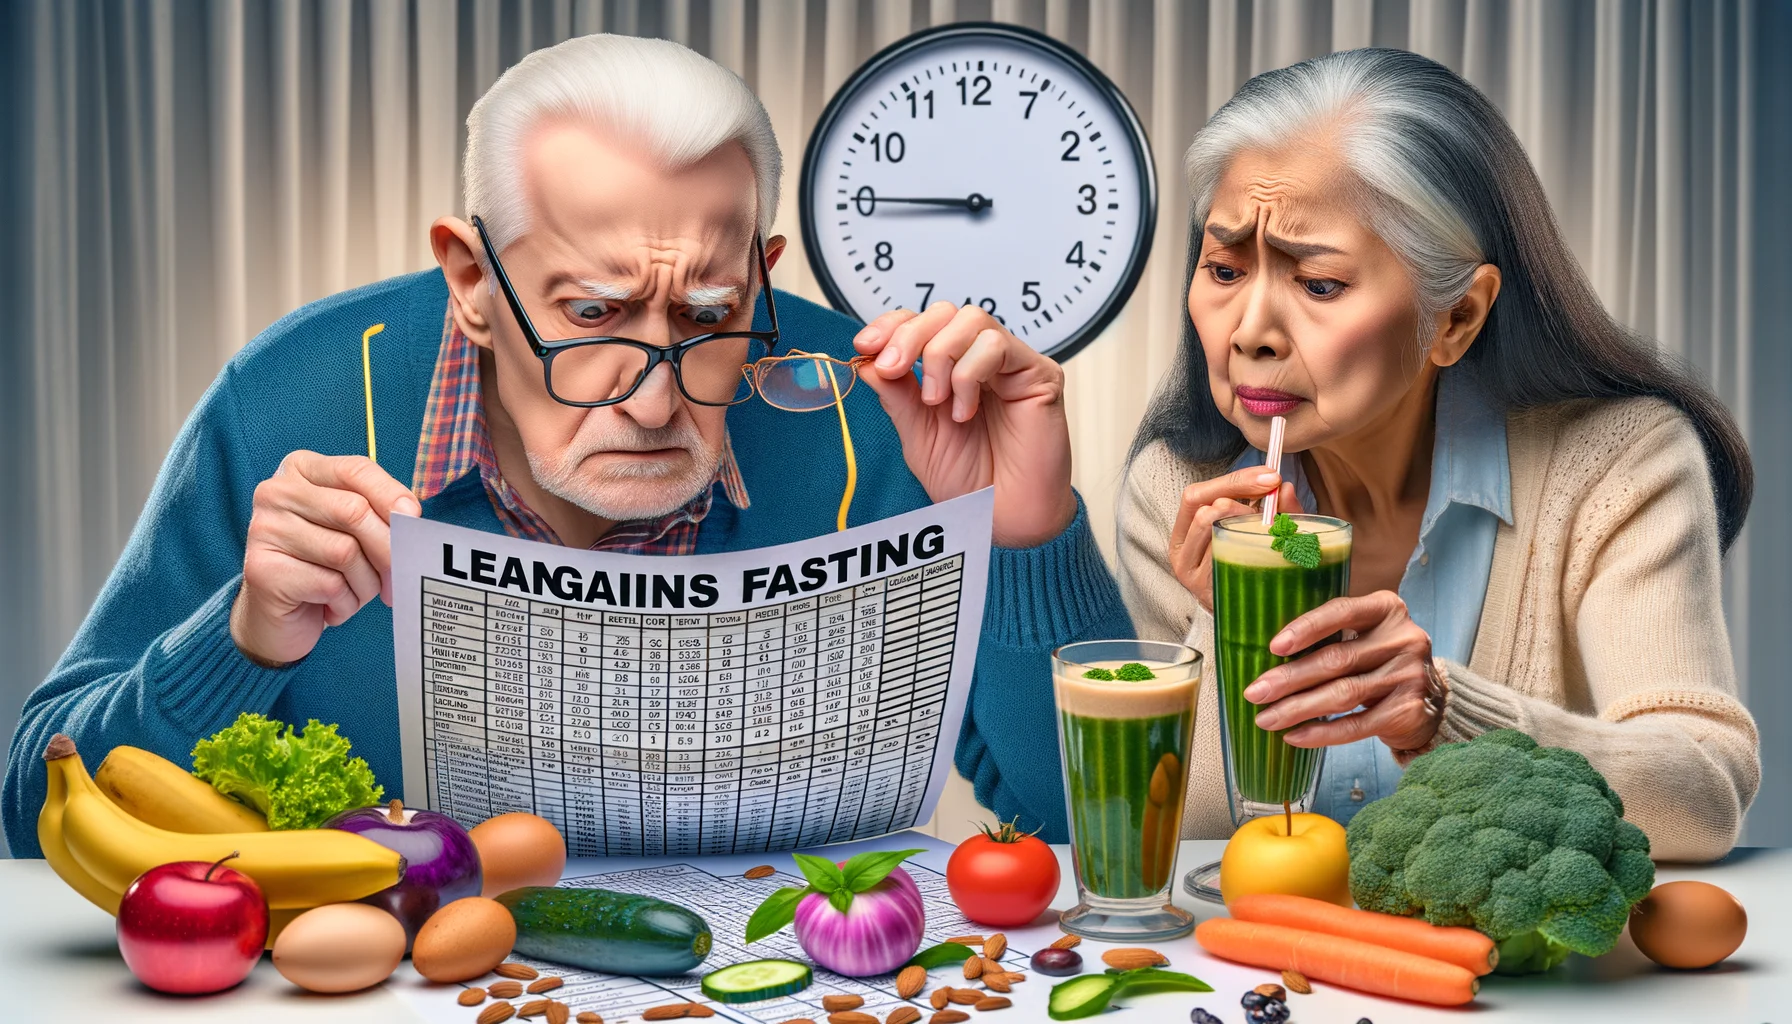 Generate an amusing realistic image that captures a humorous scene about leangains fasting with elderly individuals. Imagine an elderly Caucasian man attempting to decipher a complex leangains fasting chart, his glasses balanced precariously on his nose. Nearby, a South Asian woman, his friend, is curiously examining a vegetable smoothie, a part of the diet, with skeptical fascination. Include various elements related to dieting, like a timer for fasting duration and healthy foods in the background.